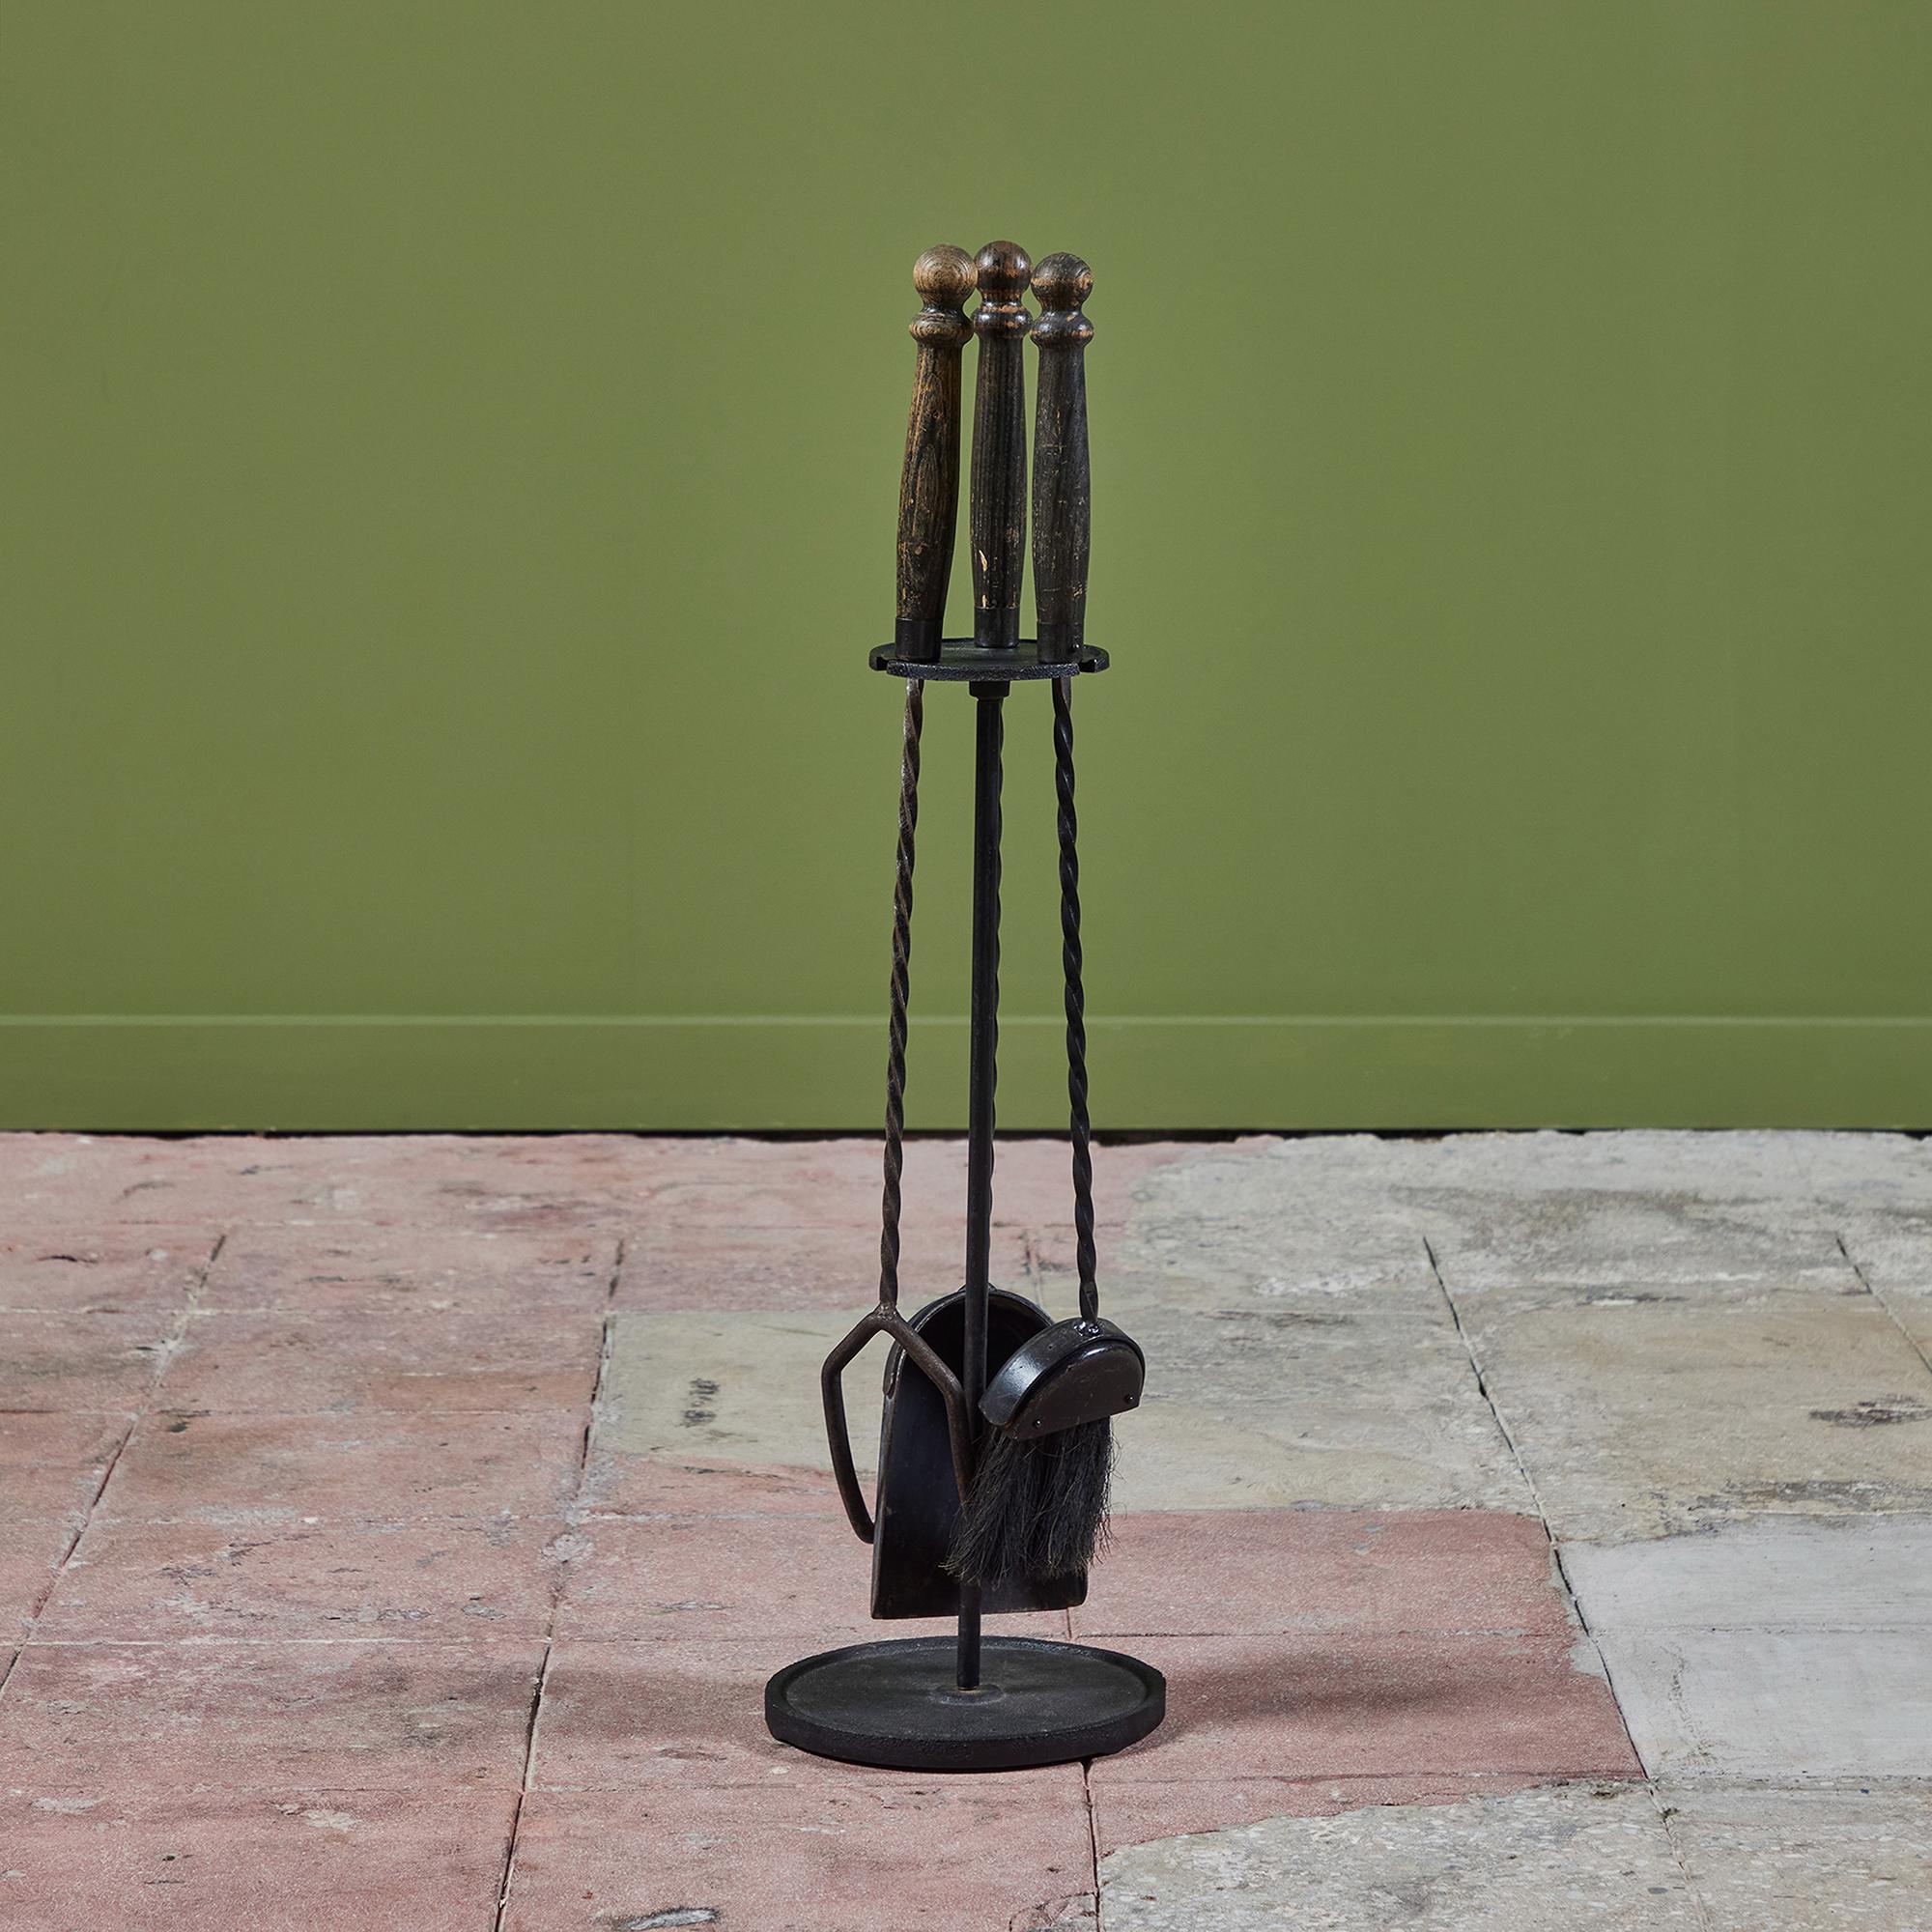 Three piece set of fireplace tools with stand. The set features three tools with carved wood handles and and twisted wrought iron stems on a rounded stand. All elements are made of blackened iron.

Dimensions
9